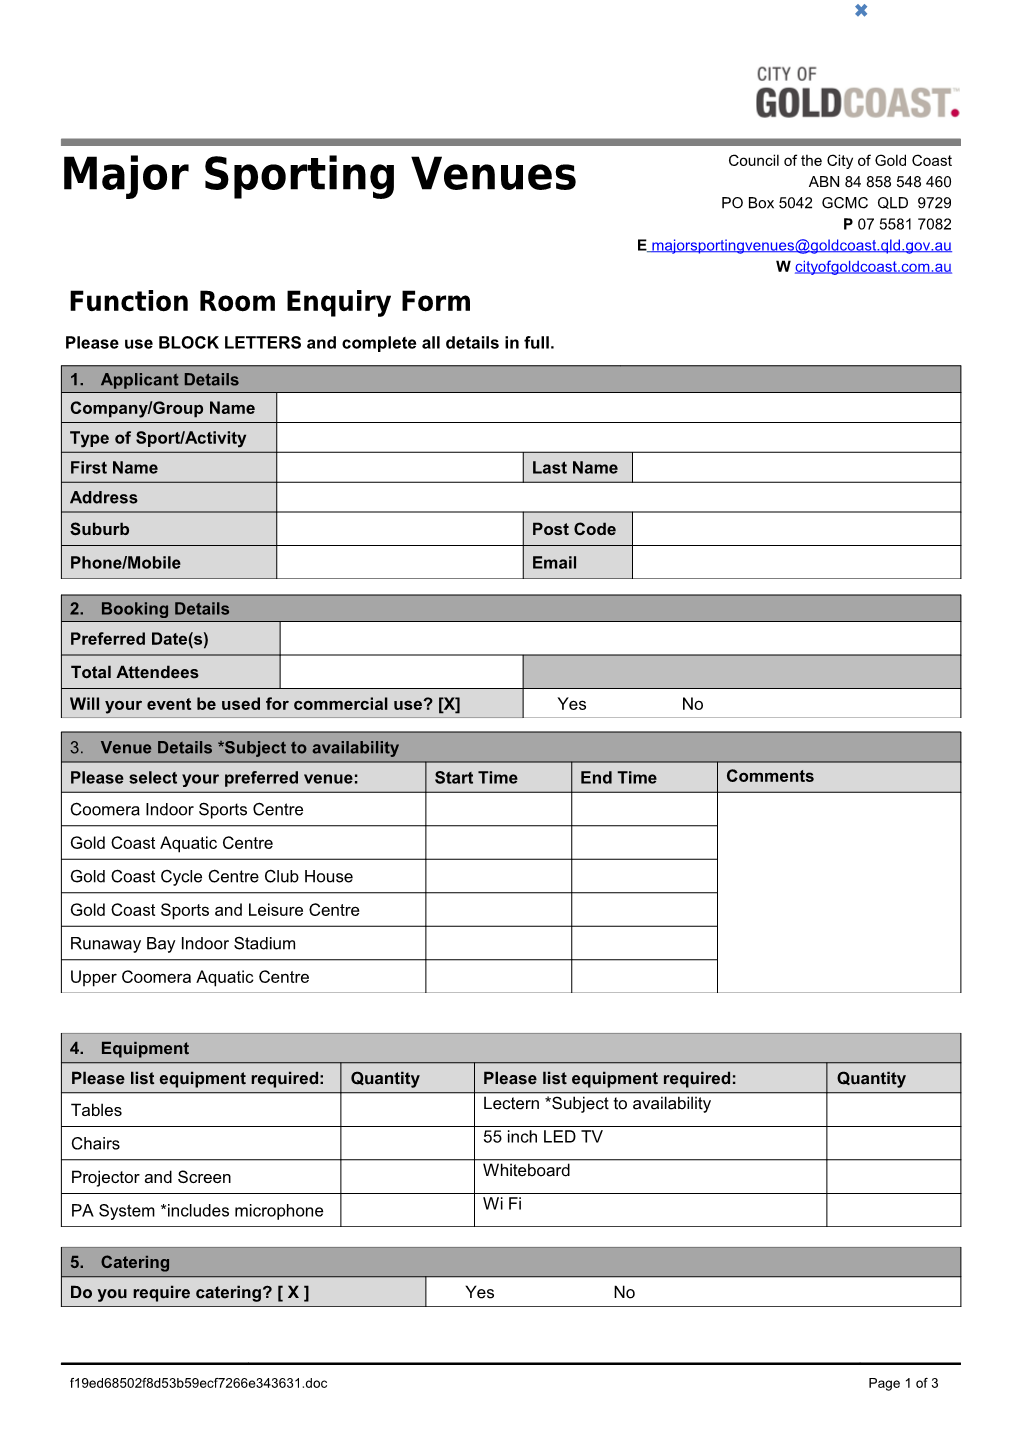 Function Room Enquiry Form